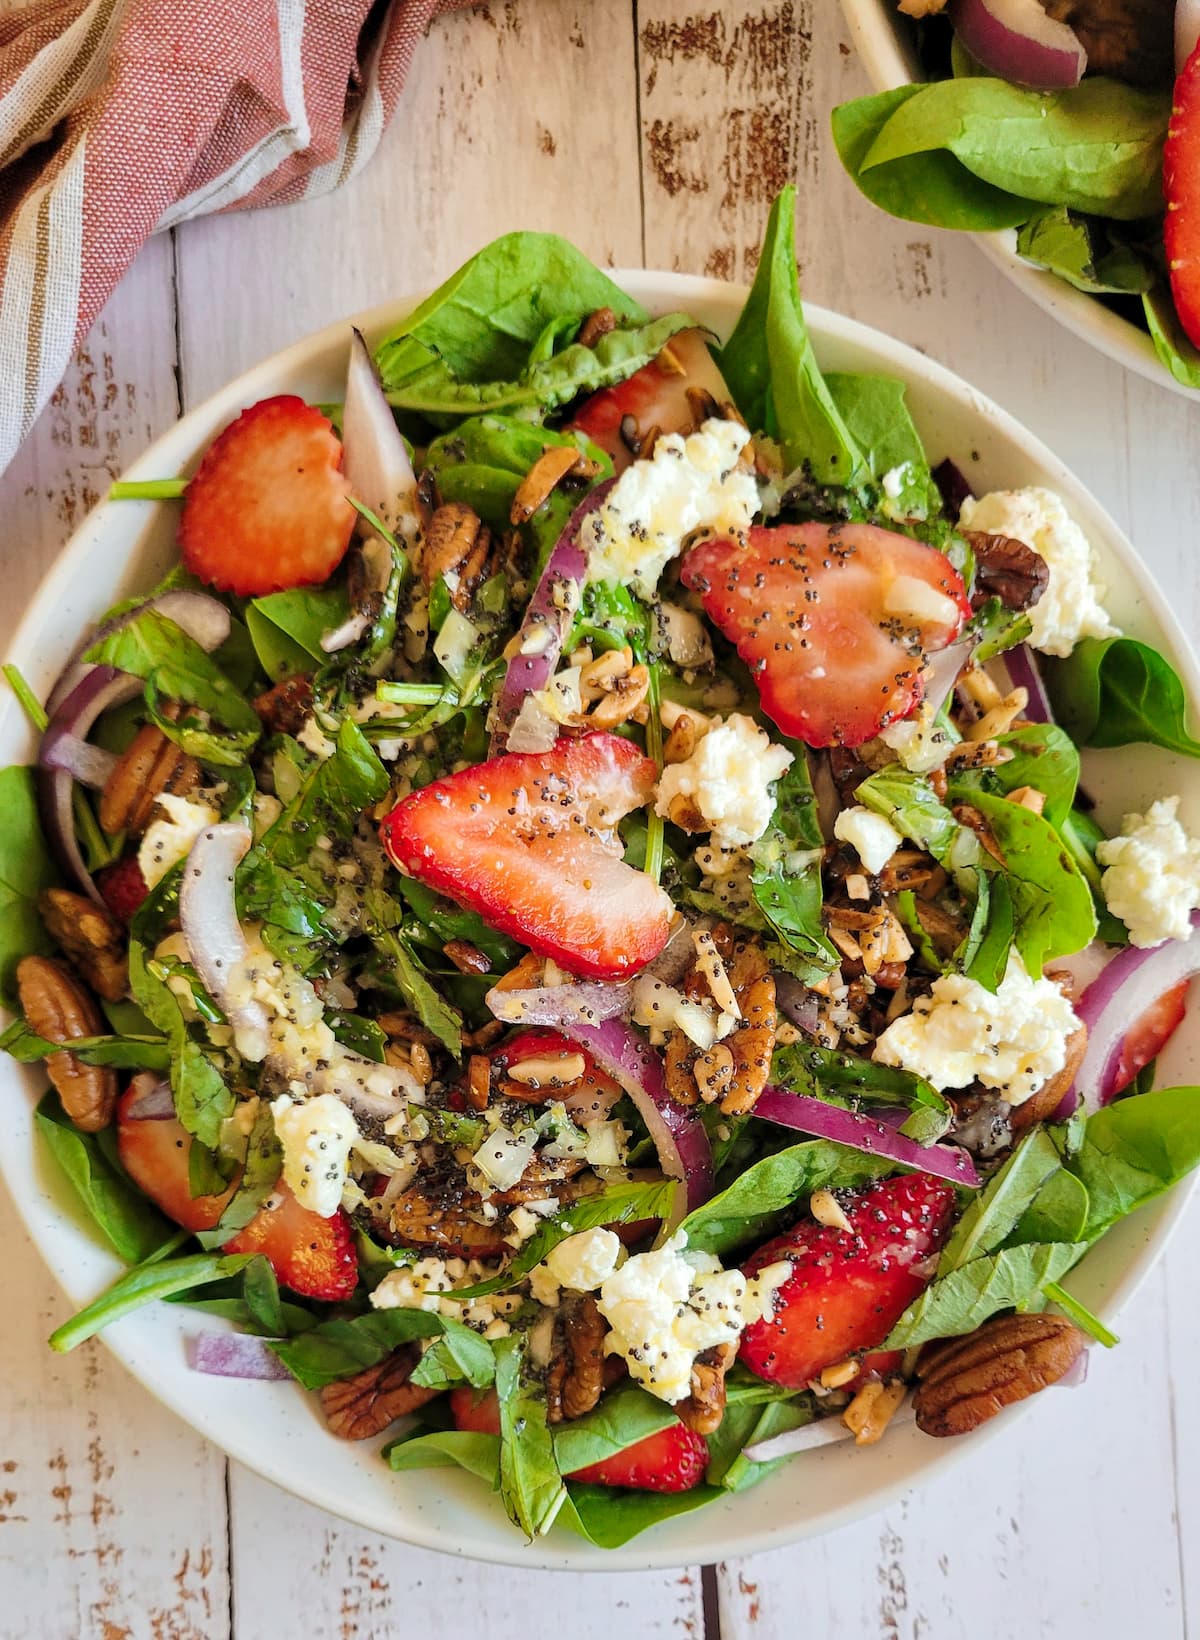 salad with spinach, sliced strawberries, goat cheese, red onions, pecans and poppy seed dressing